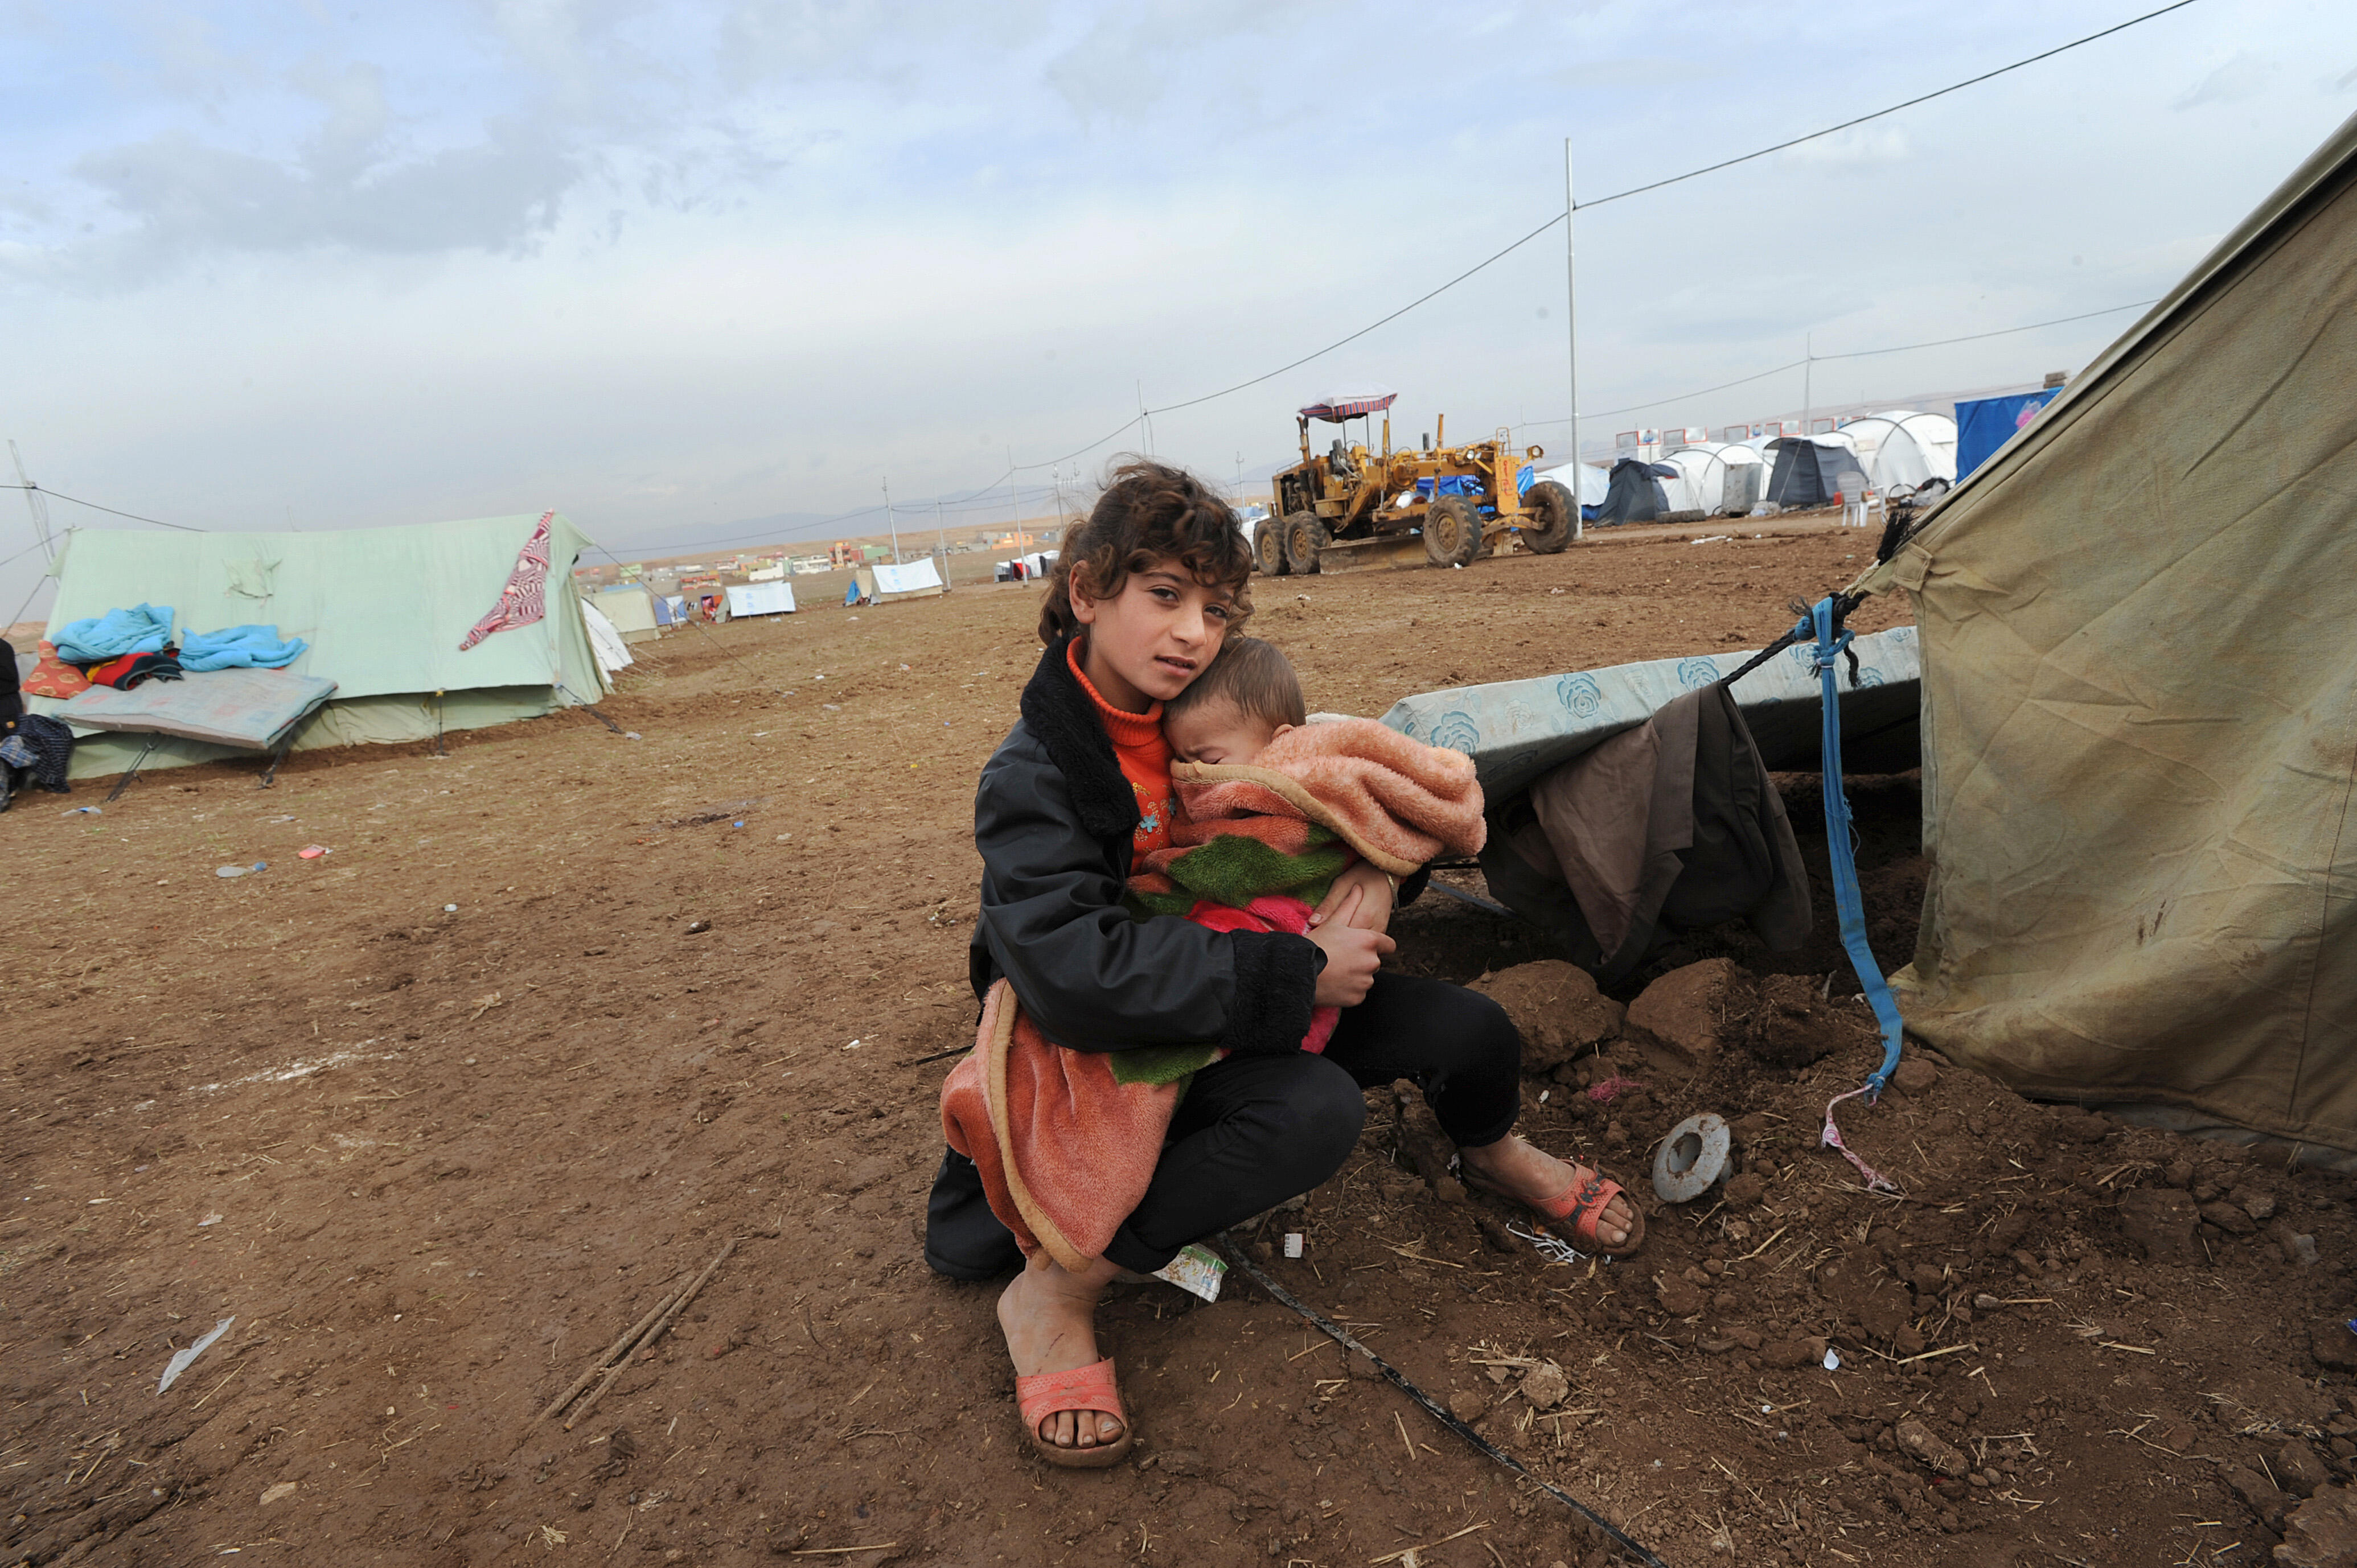 A displaced girl sits just outside a tent in Dohuk, Iraq holding a young child in her arms, bundled in a blanket.